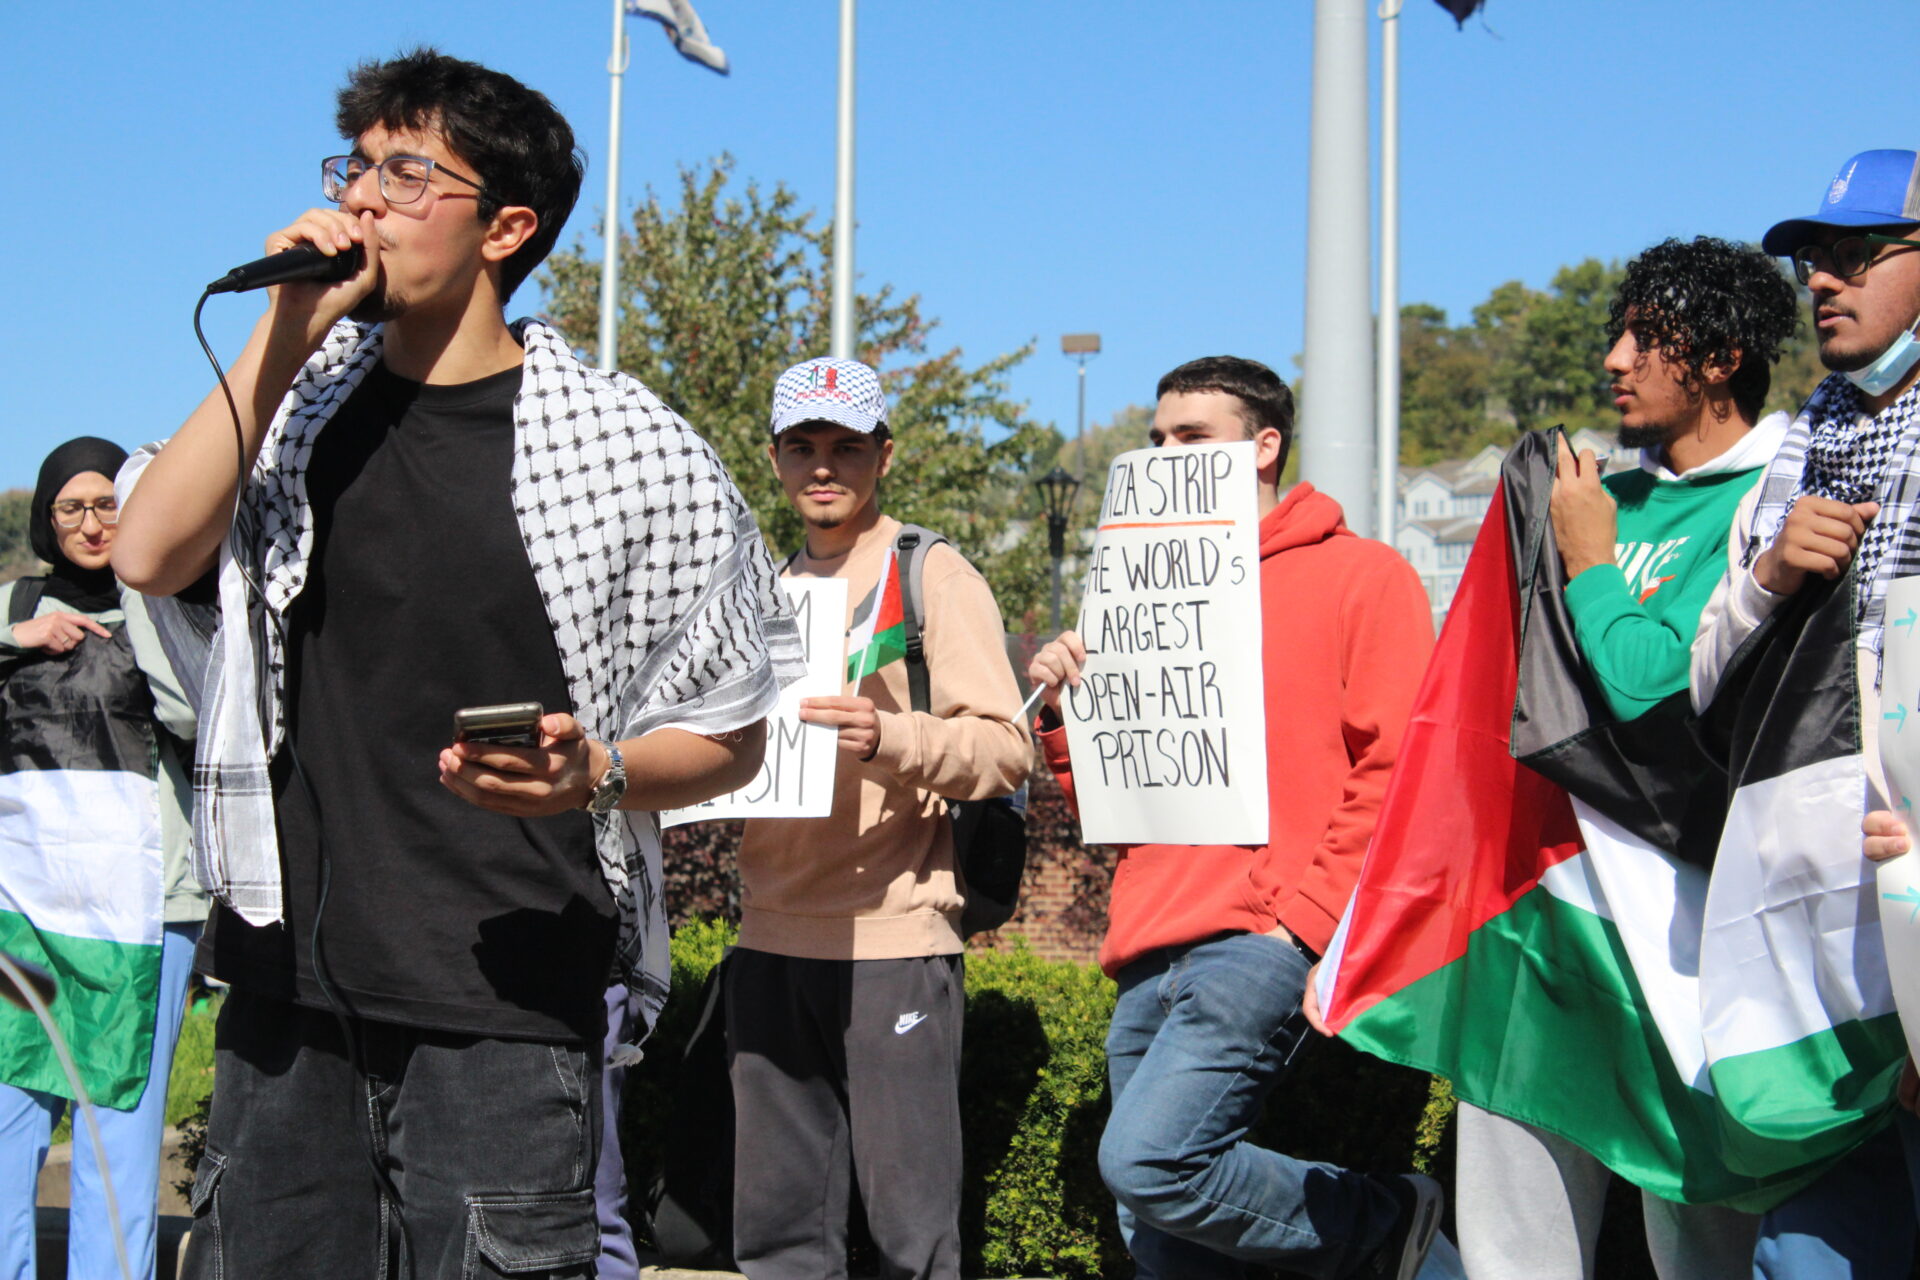 A man wearing a black shirt, black jeans and with a black and white scarf - known as a Palestinian keffiyeh - over his shoulders, speaks into a microphone while holding a cell phone. Behind him stand men holding a Palestinian flag, while a man in red holds a sign that reads "Gaza Strip: The World's Largest Open-Air Prison"